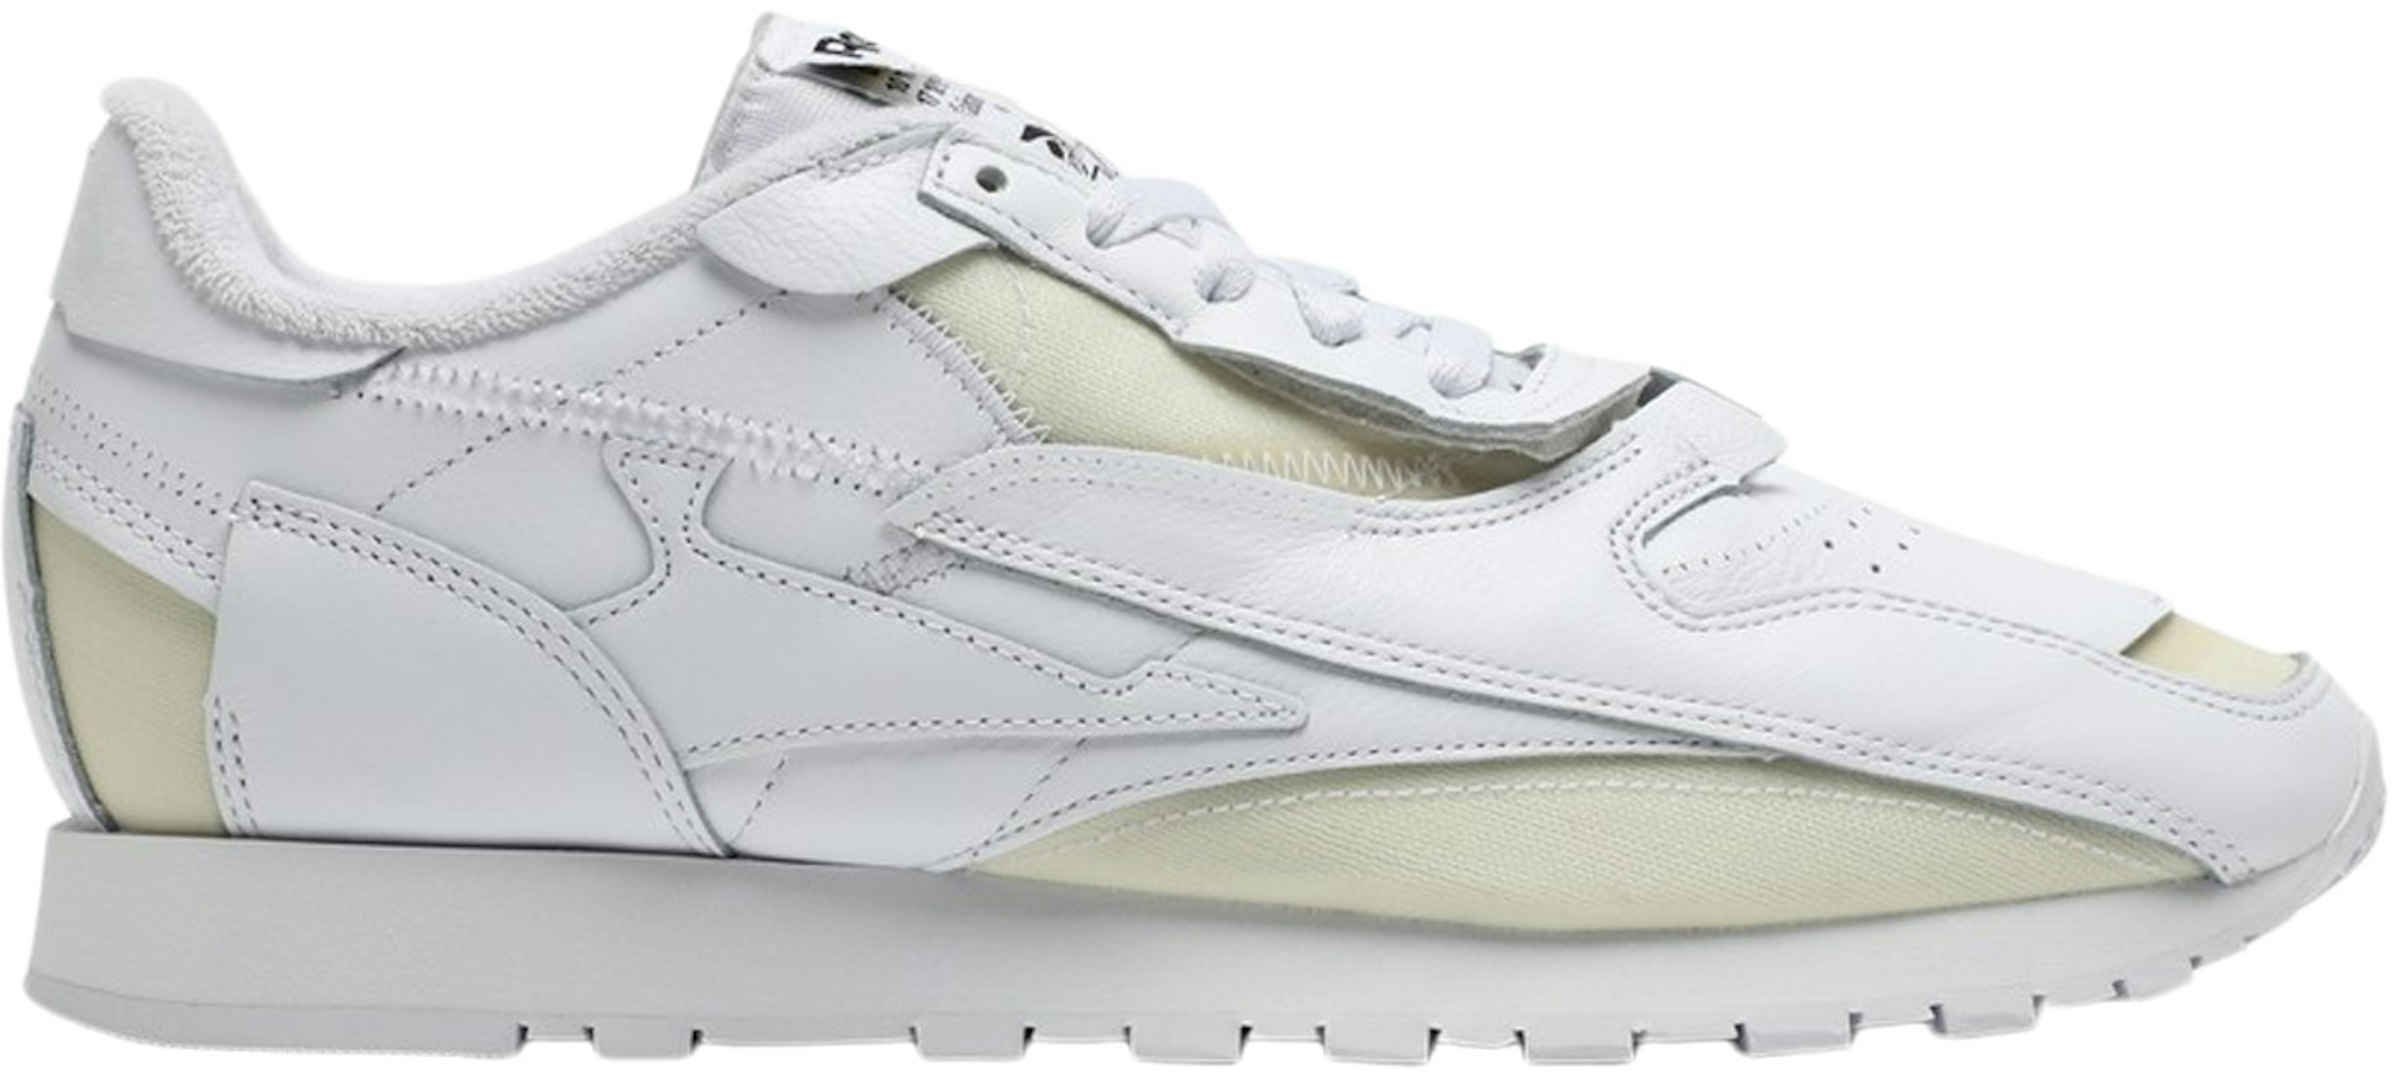 Reebok Classic Leather Re-Co Maison Project 0 Of' V2 Footwear White Men's - S37WS0588P5037-T1003 / GV9344 - US